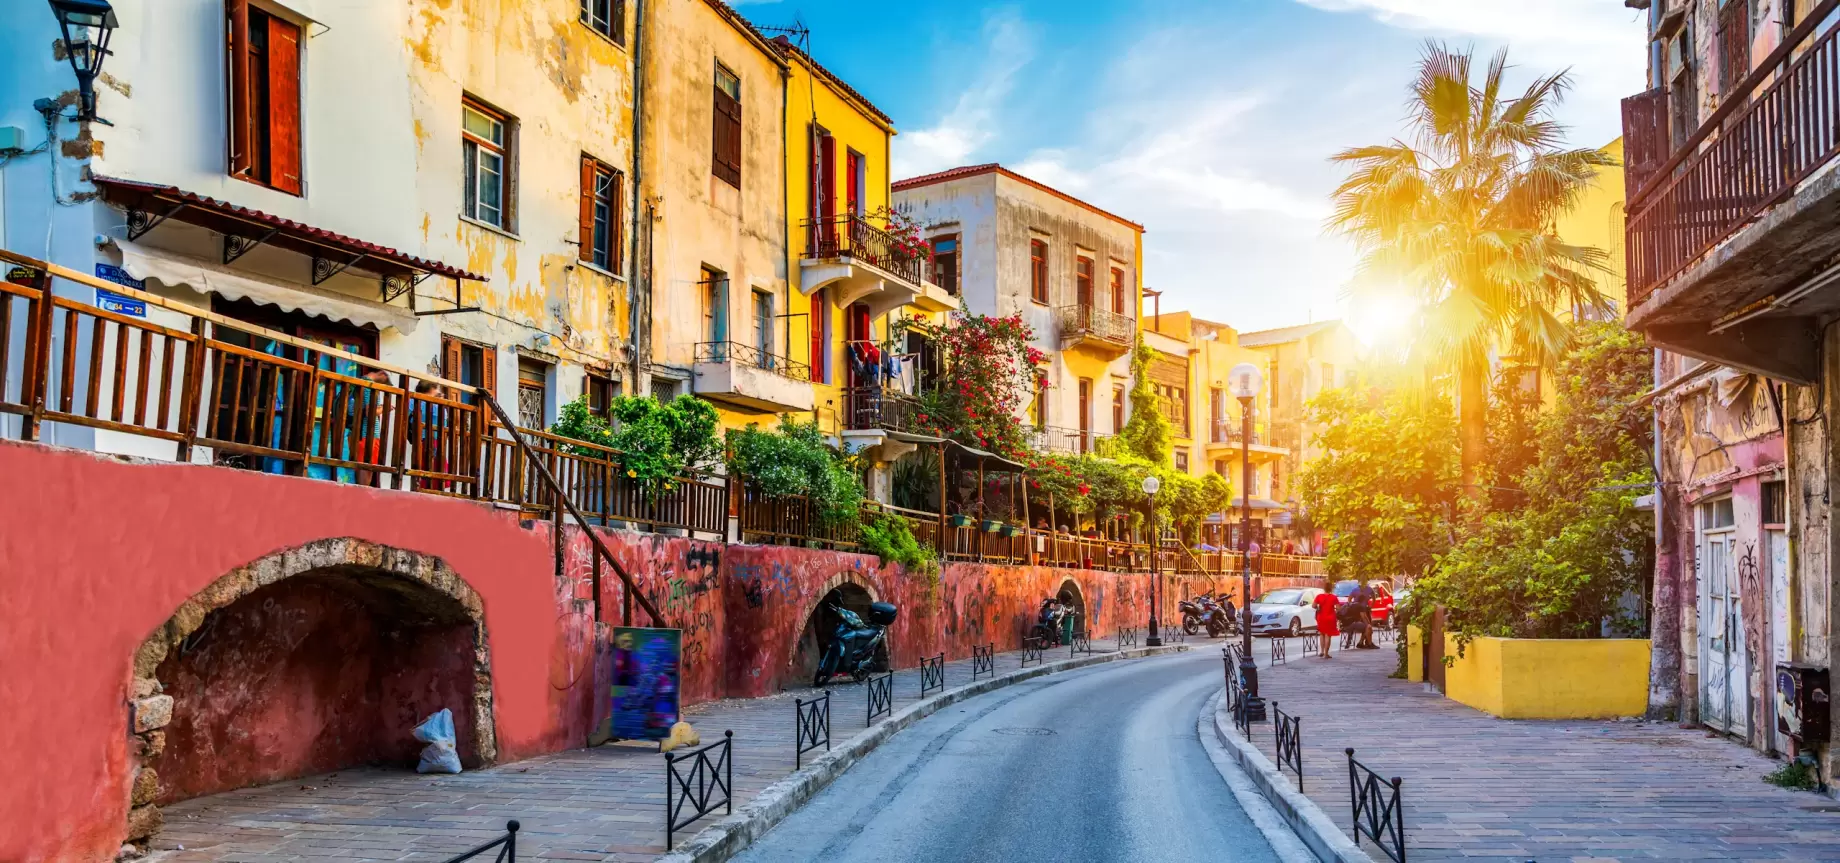 Excursions from Chania